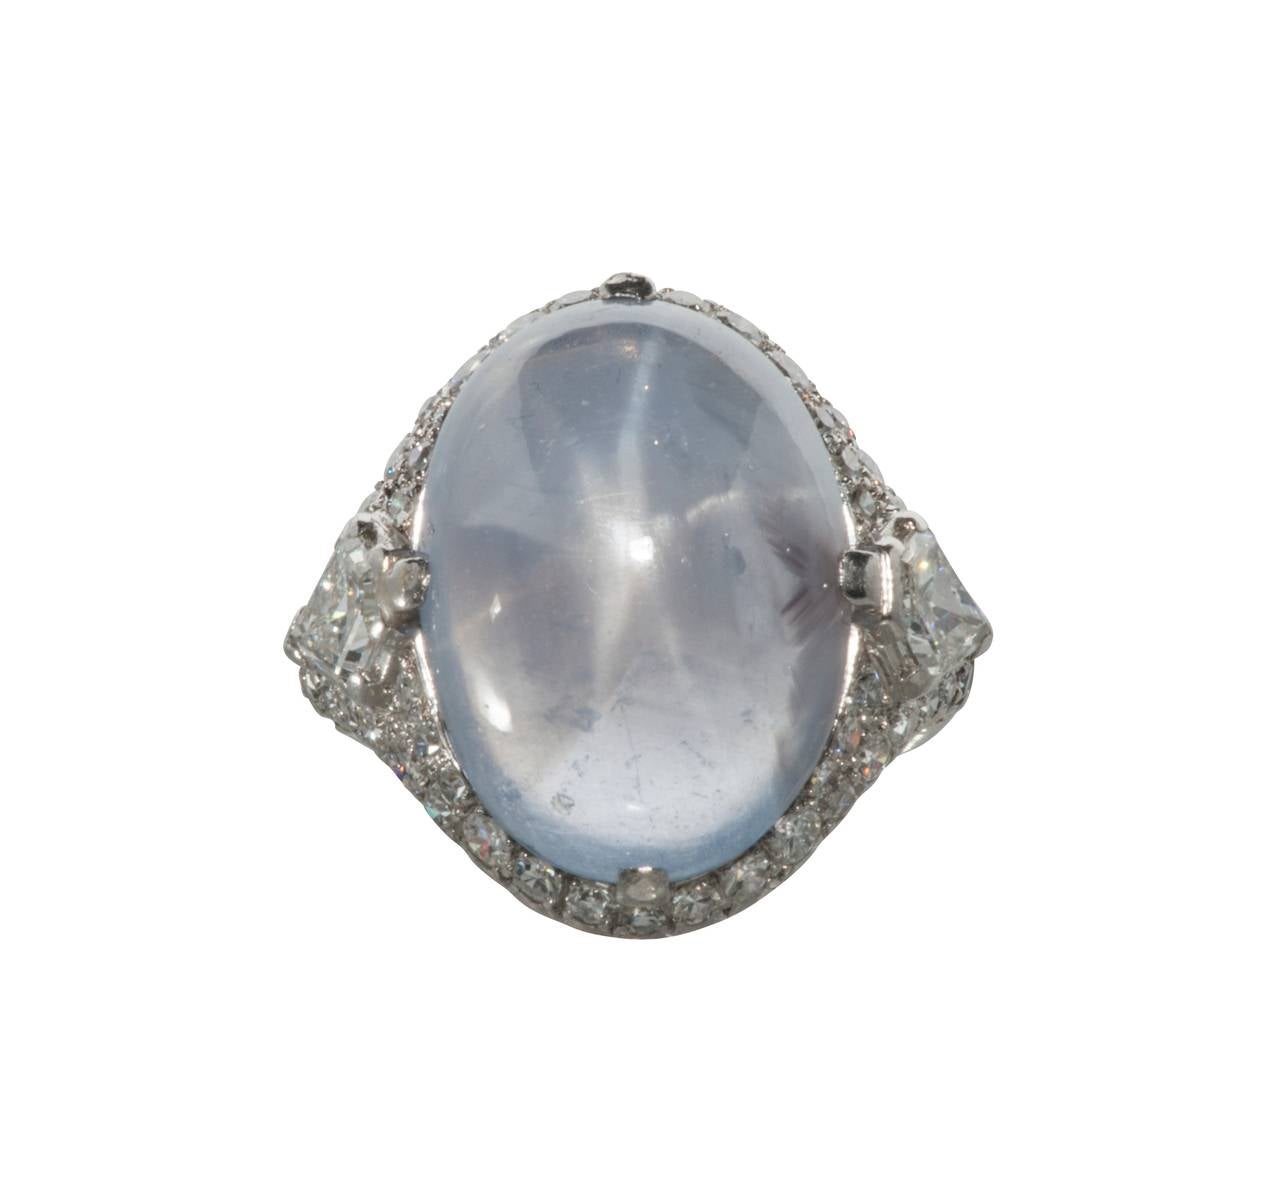 This is a striking star sapphire set in platinum with diamonds.  It is fitted with a fingermate adjustable shank. When closed it is a size 5. Unfortunately the photographs do not do the star in the sapphire justice. The color is bluish, lavender,